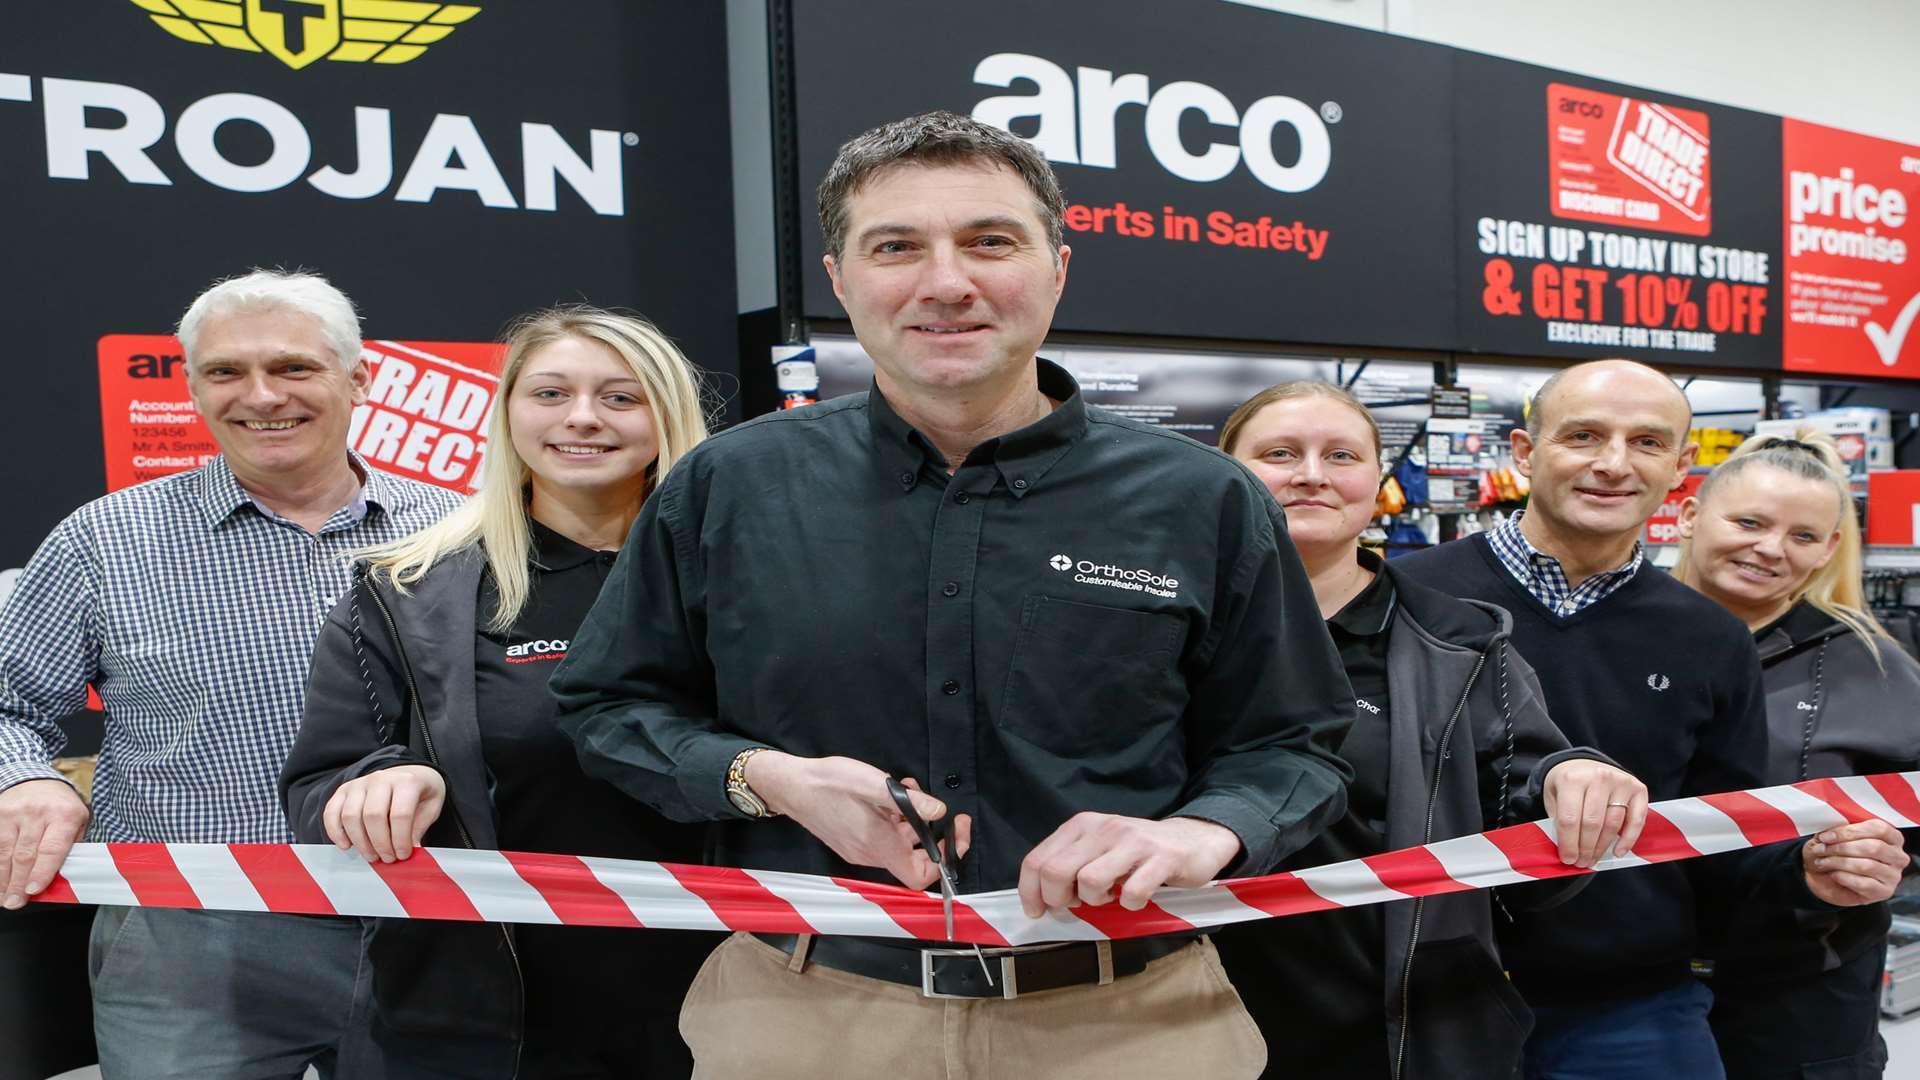 Arco safety shop opens at Acorn Industrial Park, Crayford. L-R Nick Clark - manager, Chloe Georgiou, Ronnie Irani - former Essex and England Cricketer, Charmaine Brignull, Paul Frewin - retail director, and Debbie Capon